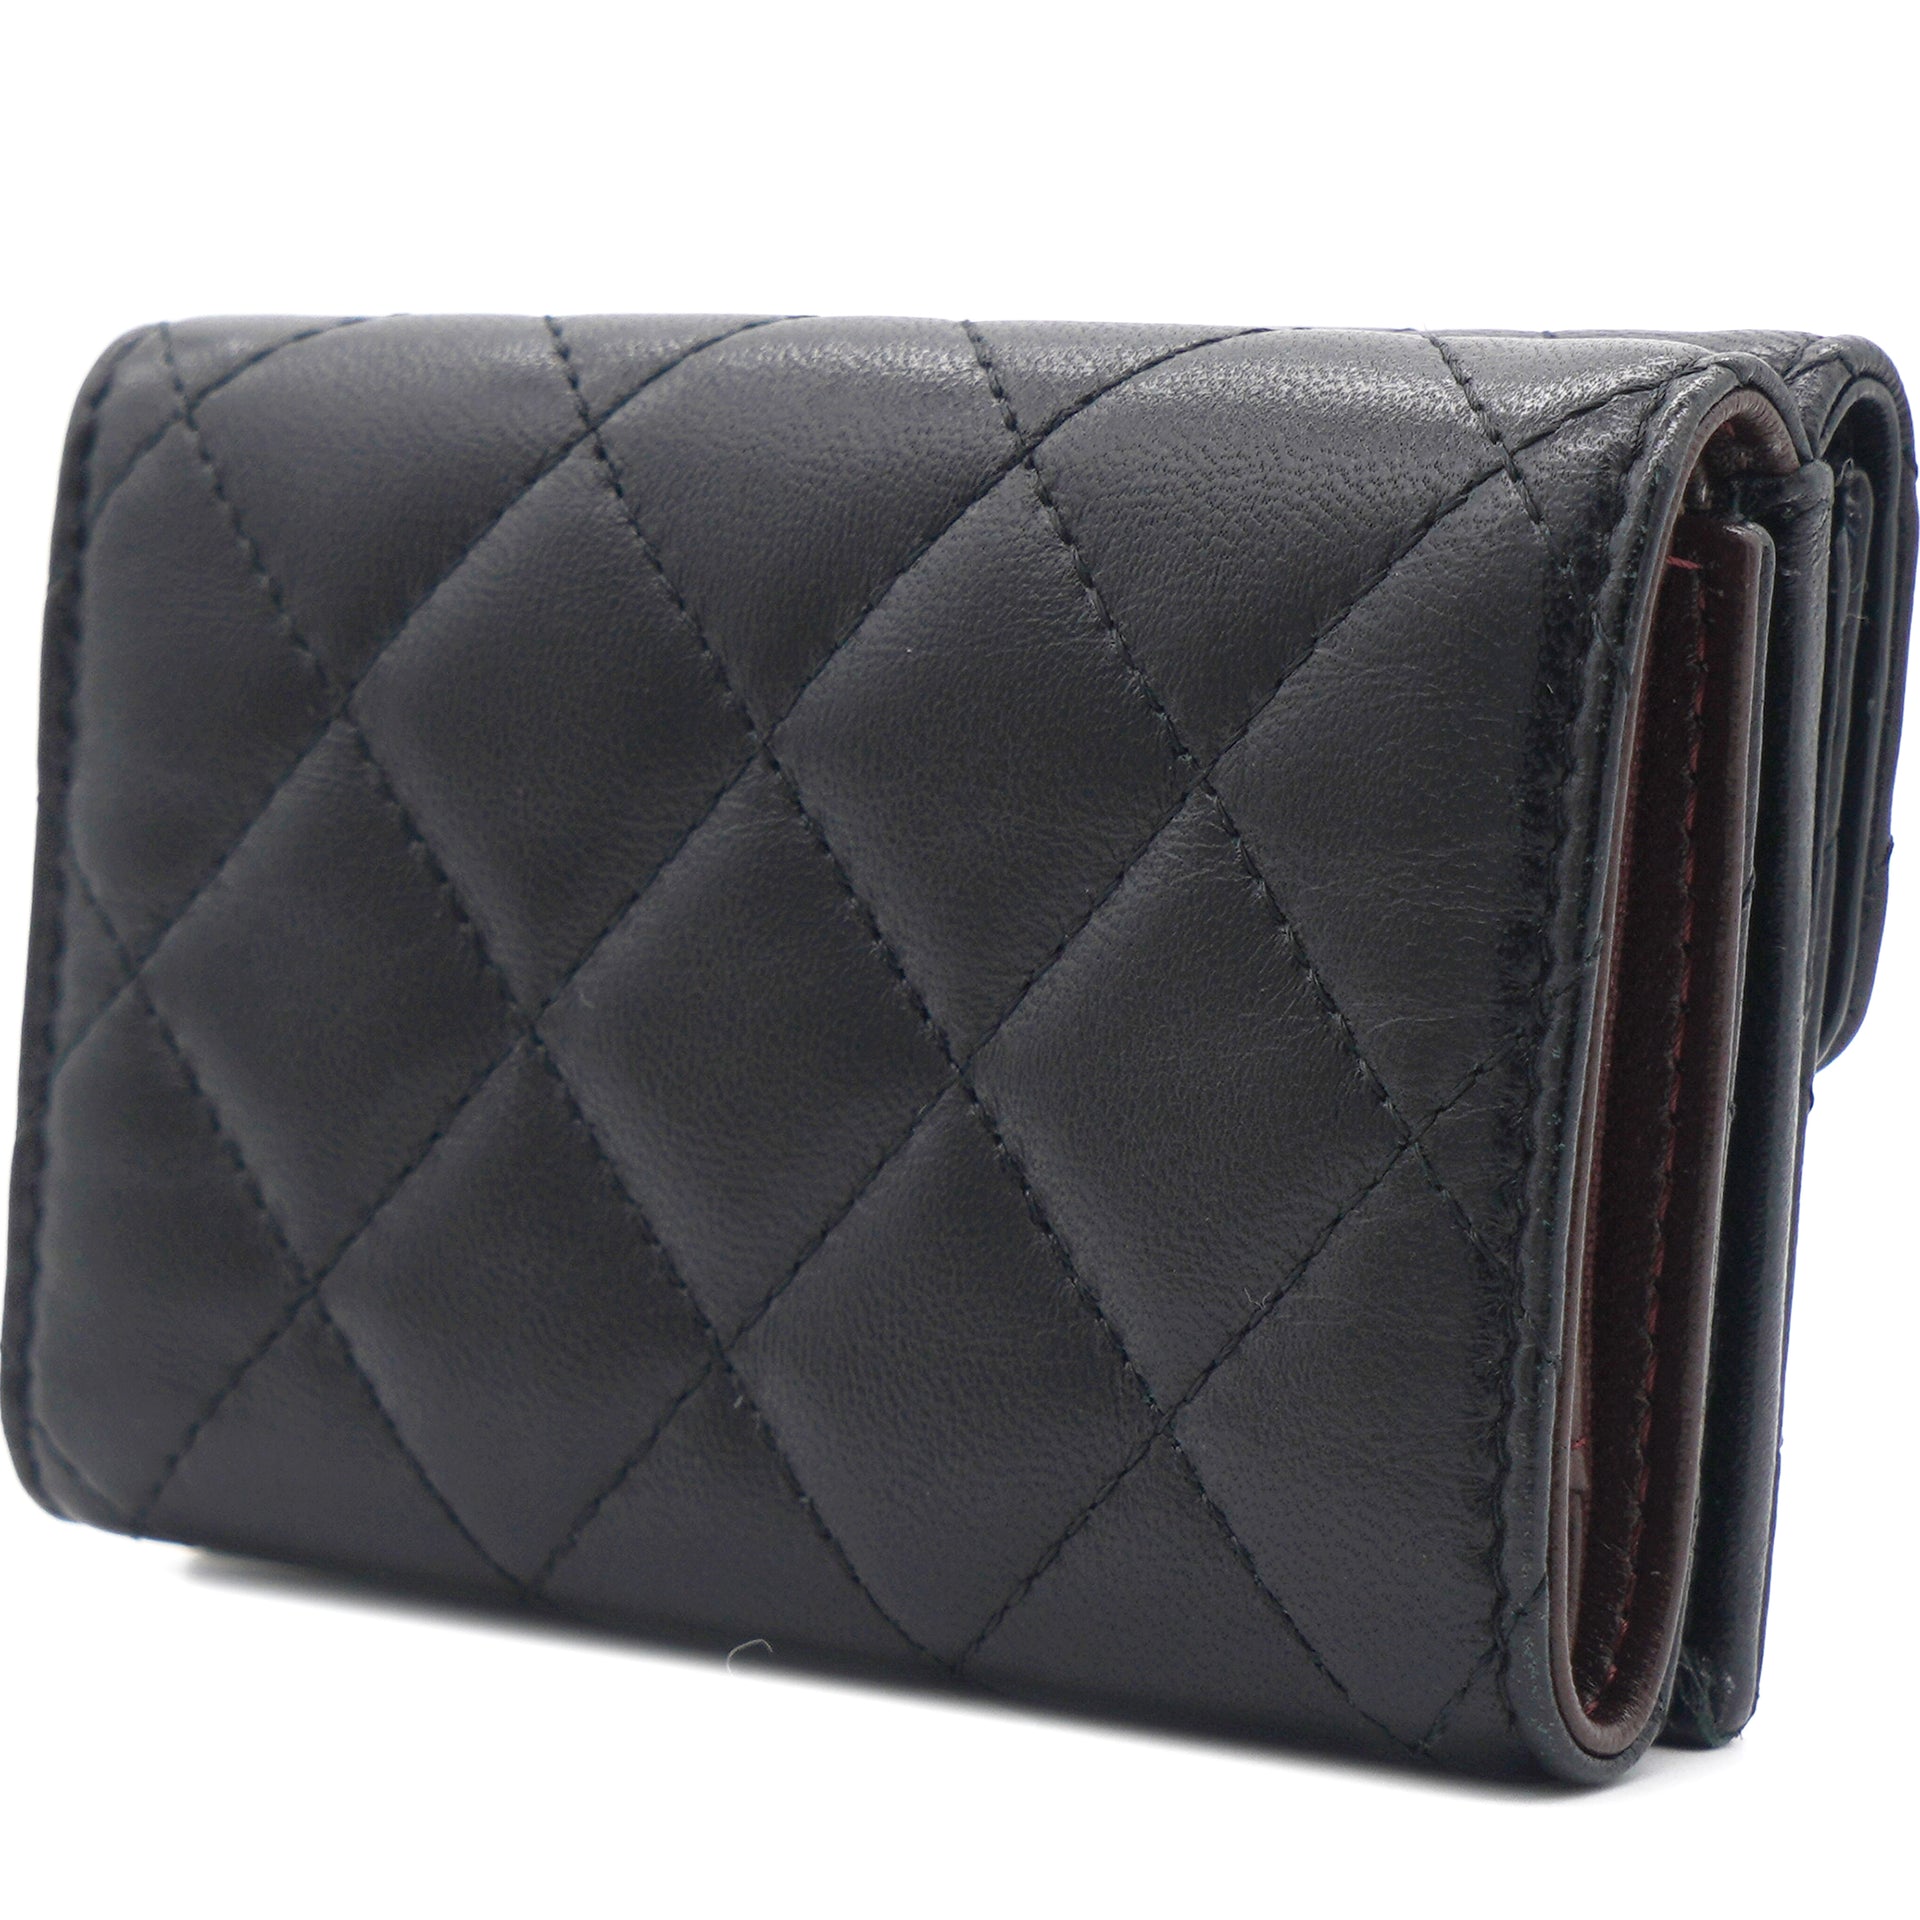 Lambskin Quilted Classic Tri-Fold Wallet Black